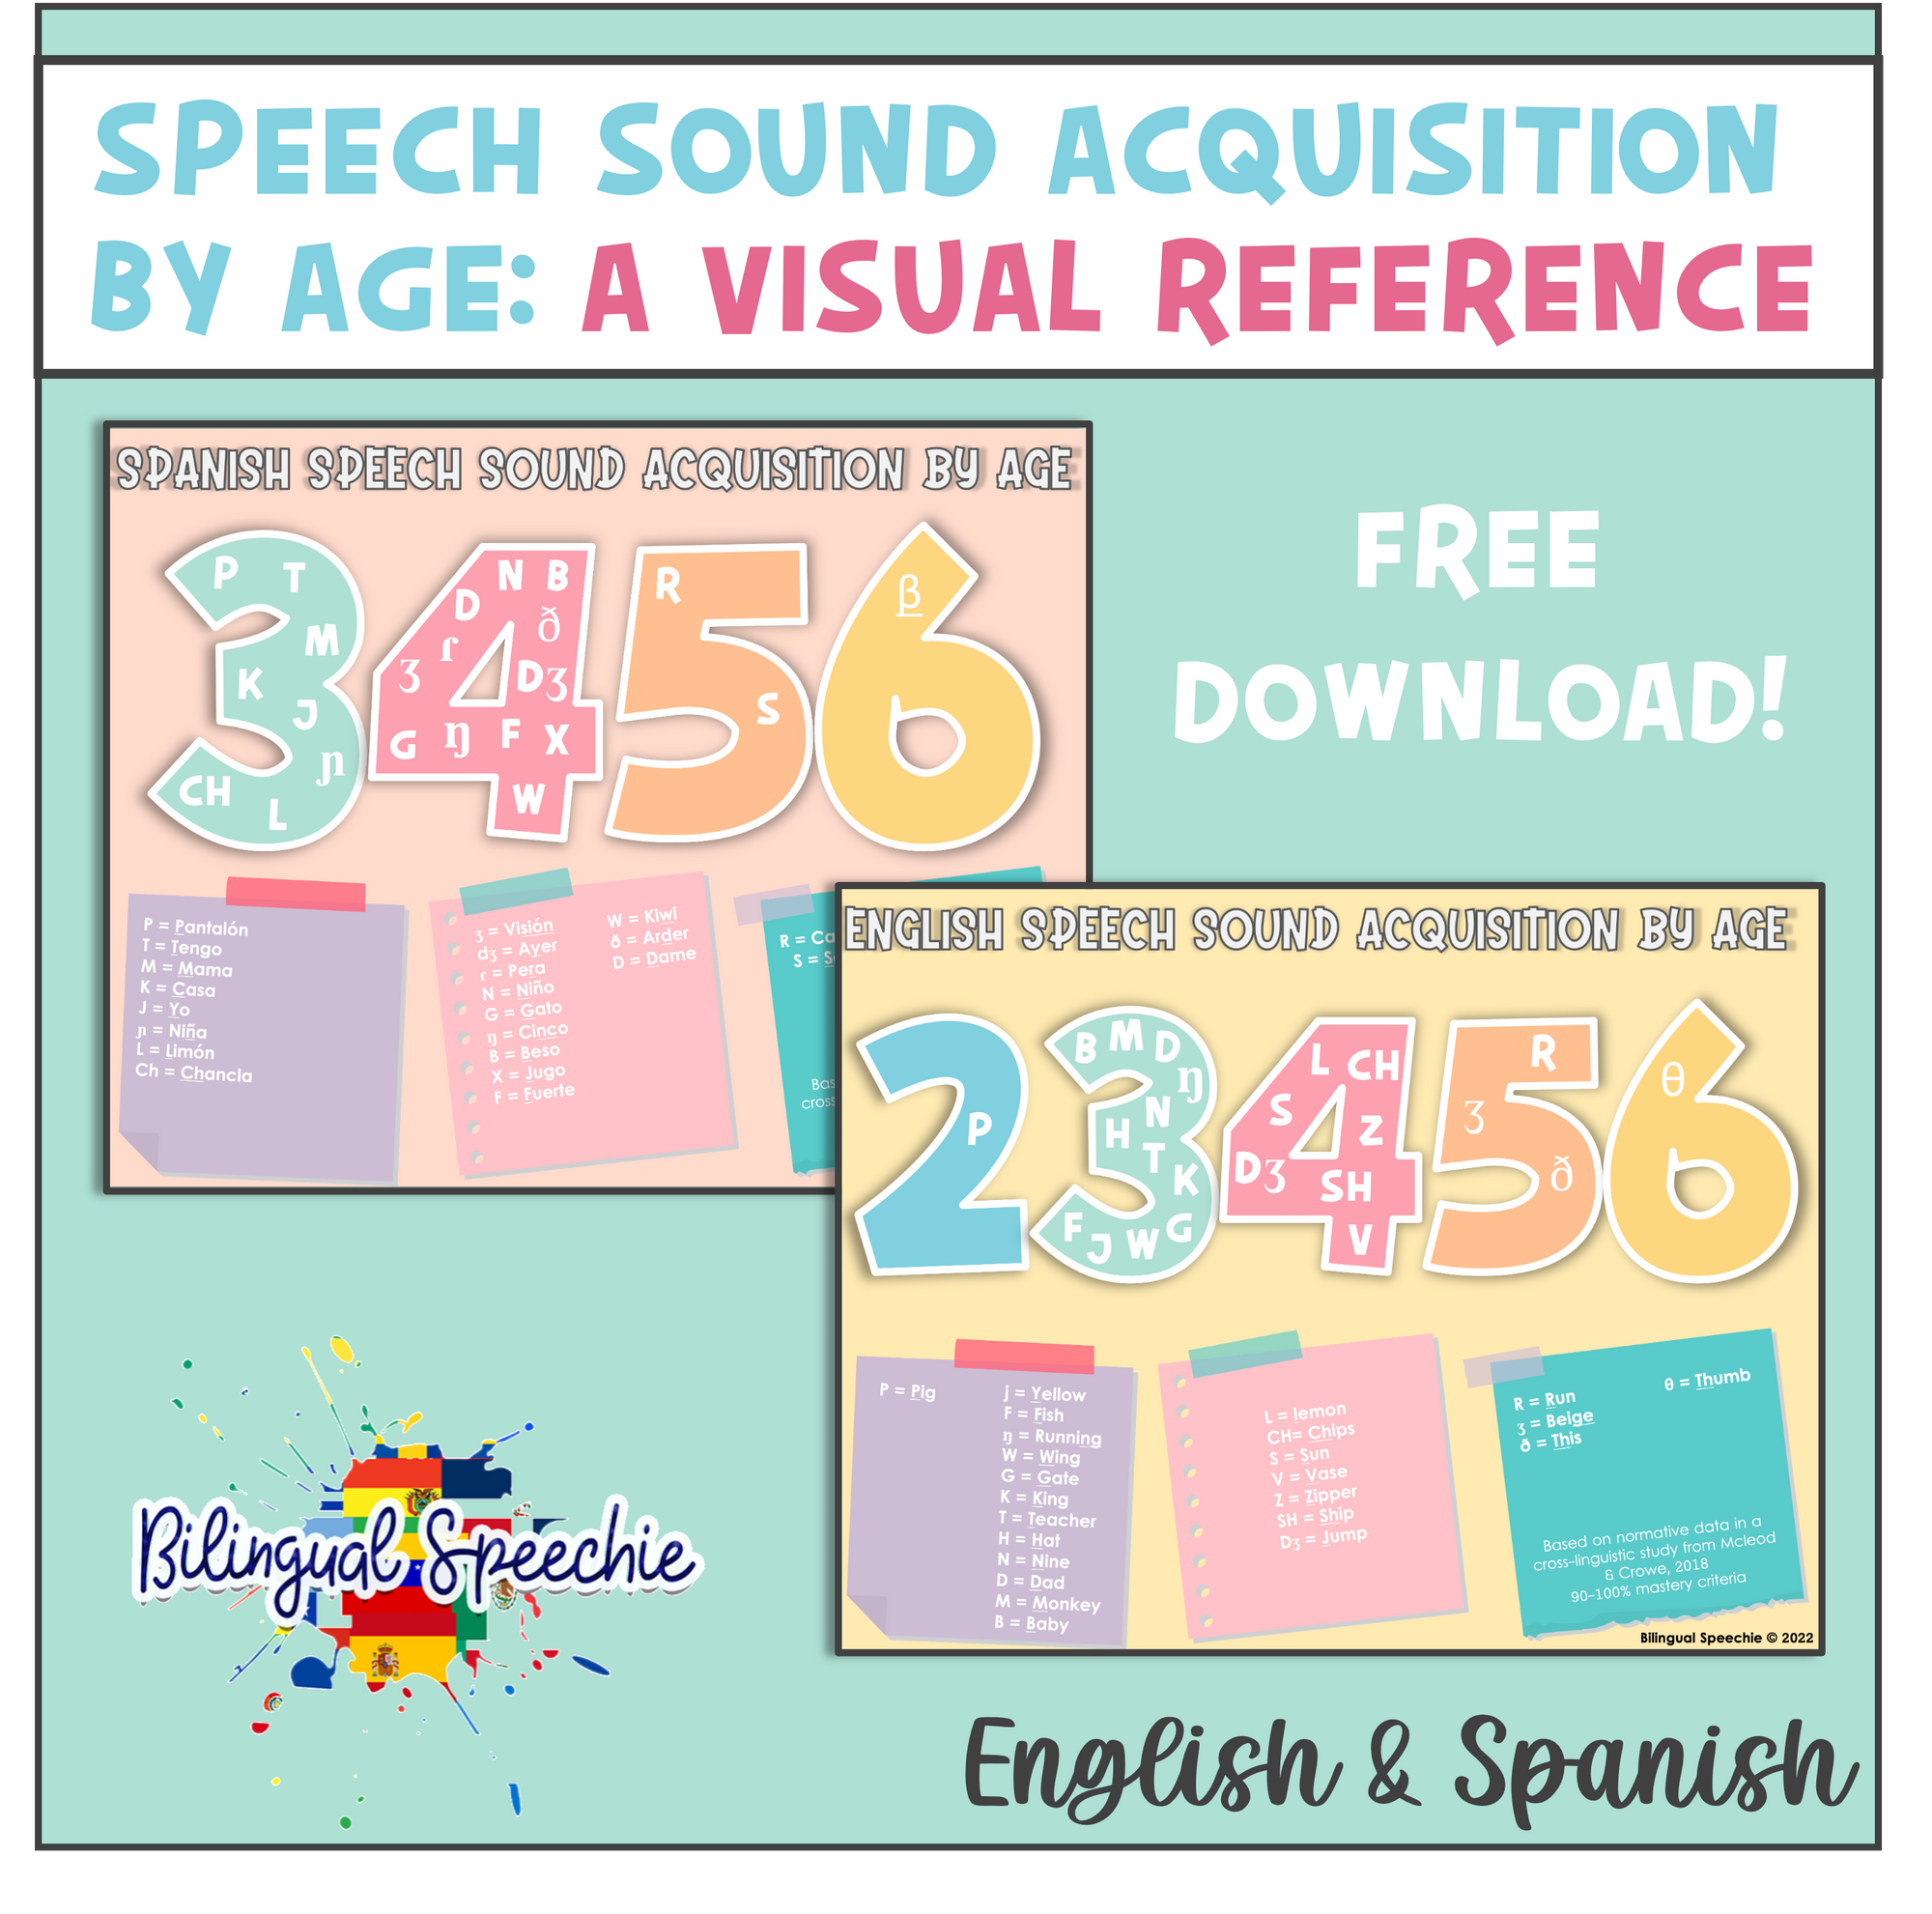 Spanish & English Articulation Norms | Speech Sound Acquisition